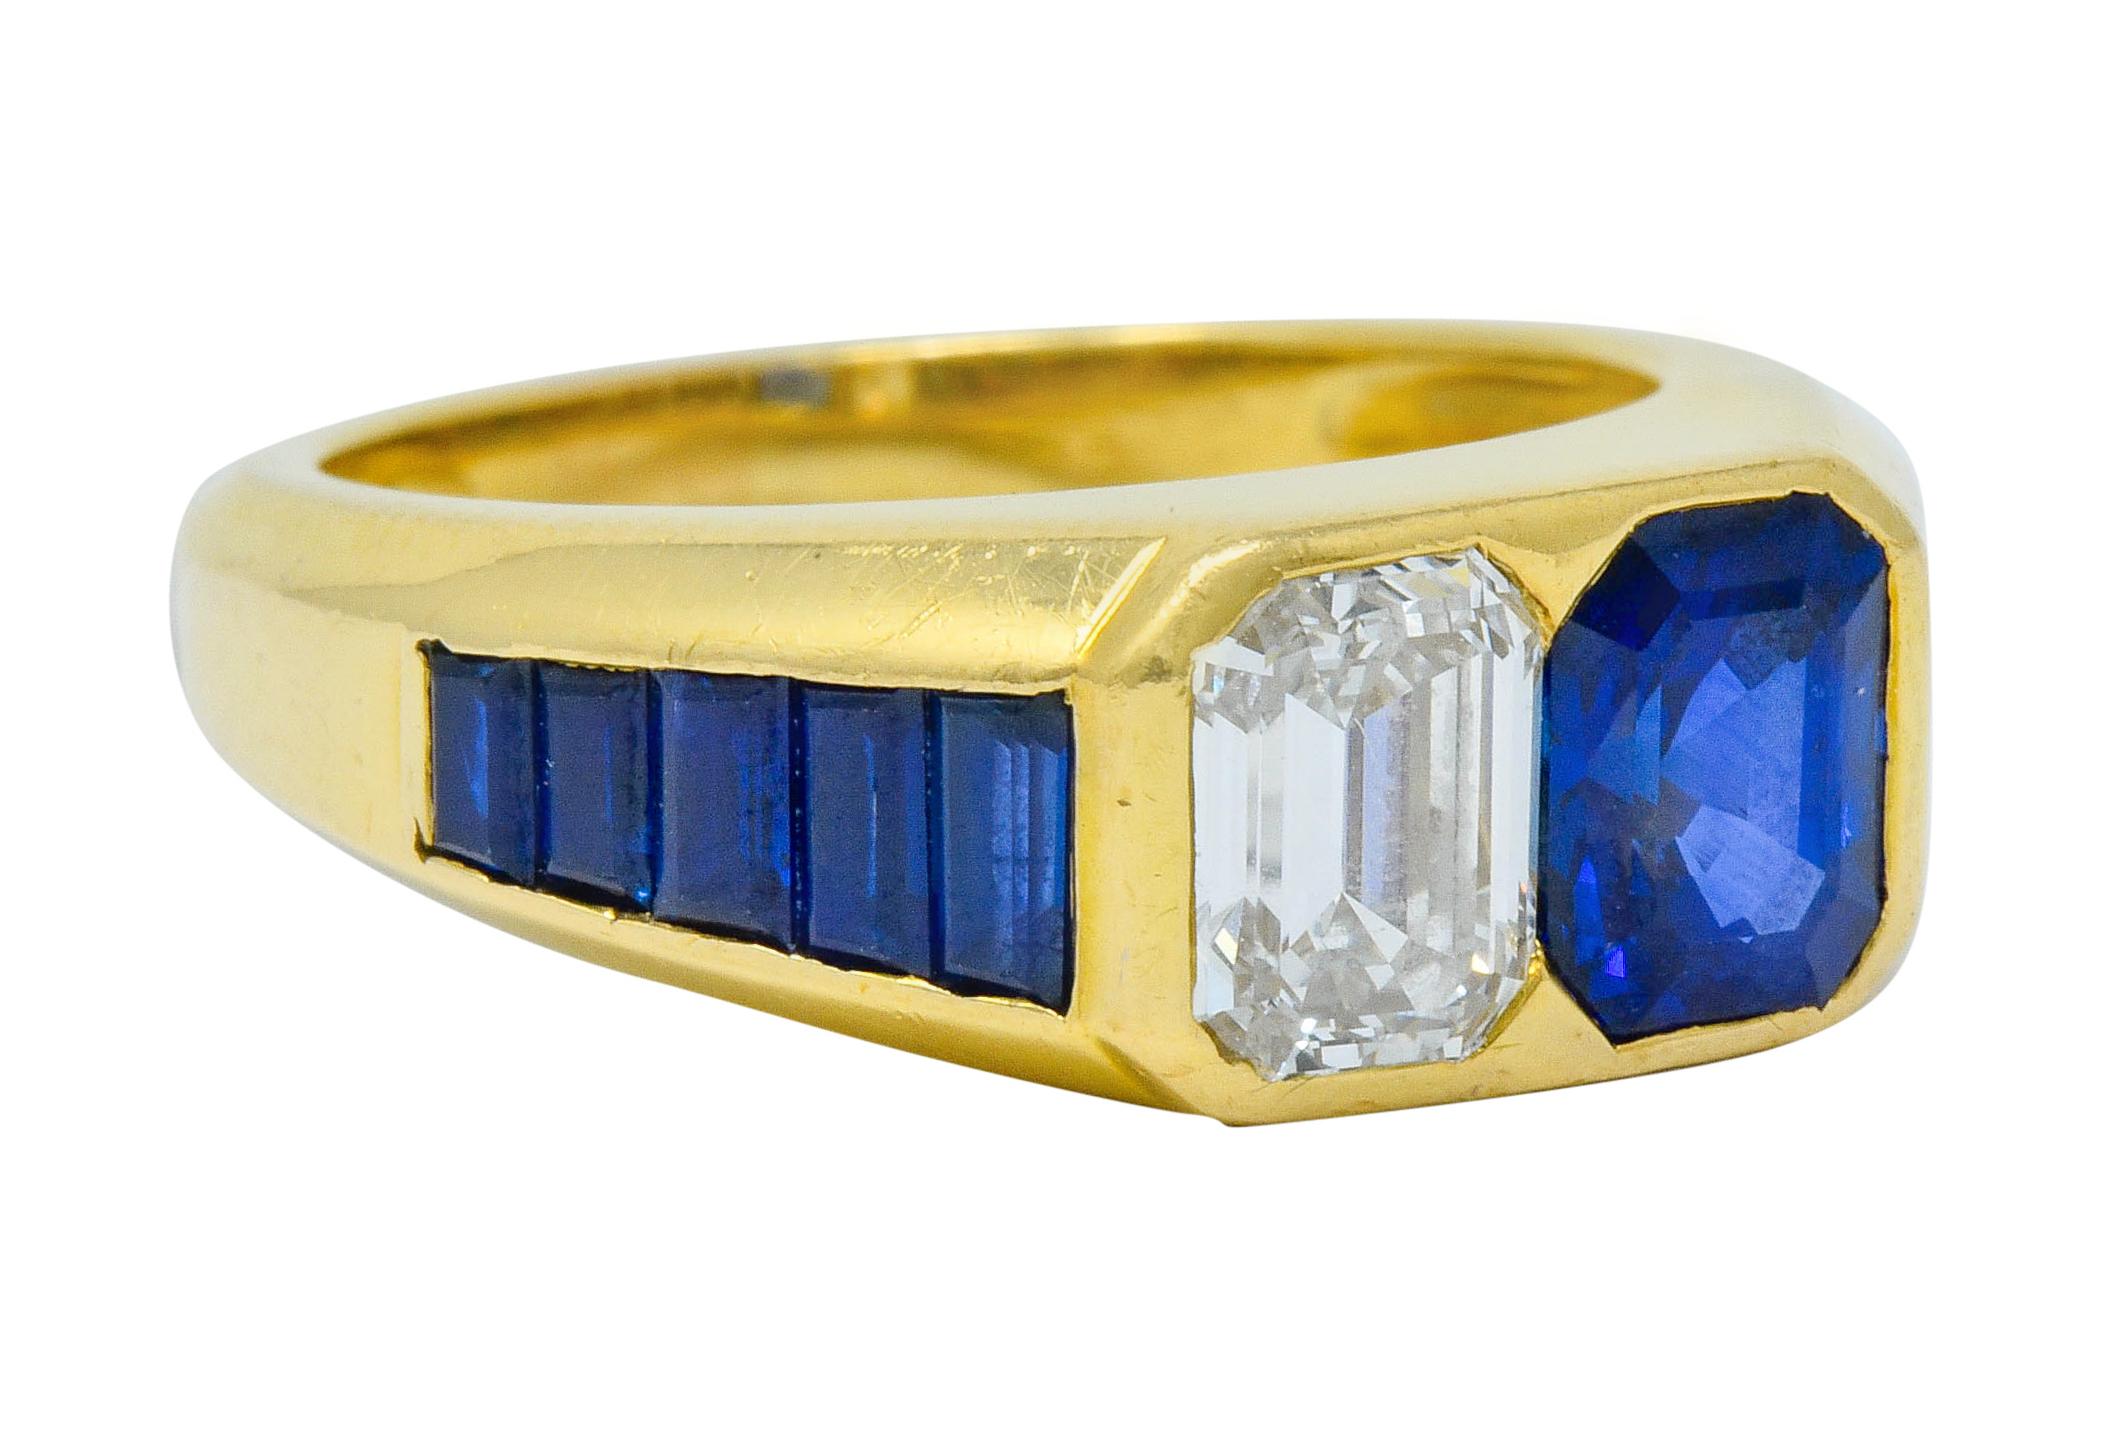 Centering an emerald cut sapphire and diamond, flush set side-by-side

Flanked by channel set shoulders, one side featuring rectangular cut sapphire while other features baguette cut diamonds

Total diamond weight is 1.61 carats with G/H color and